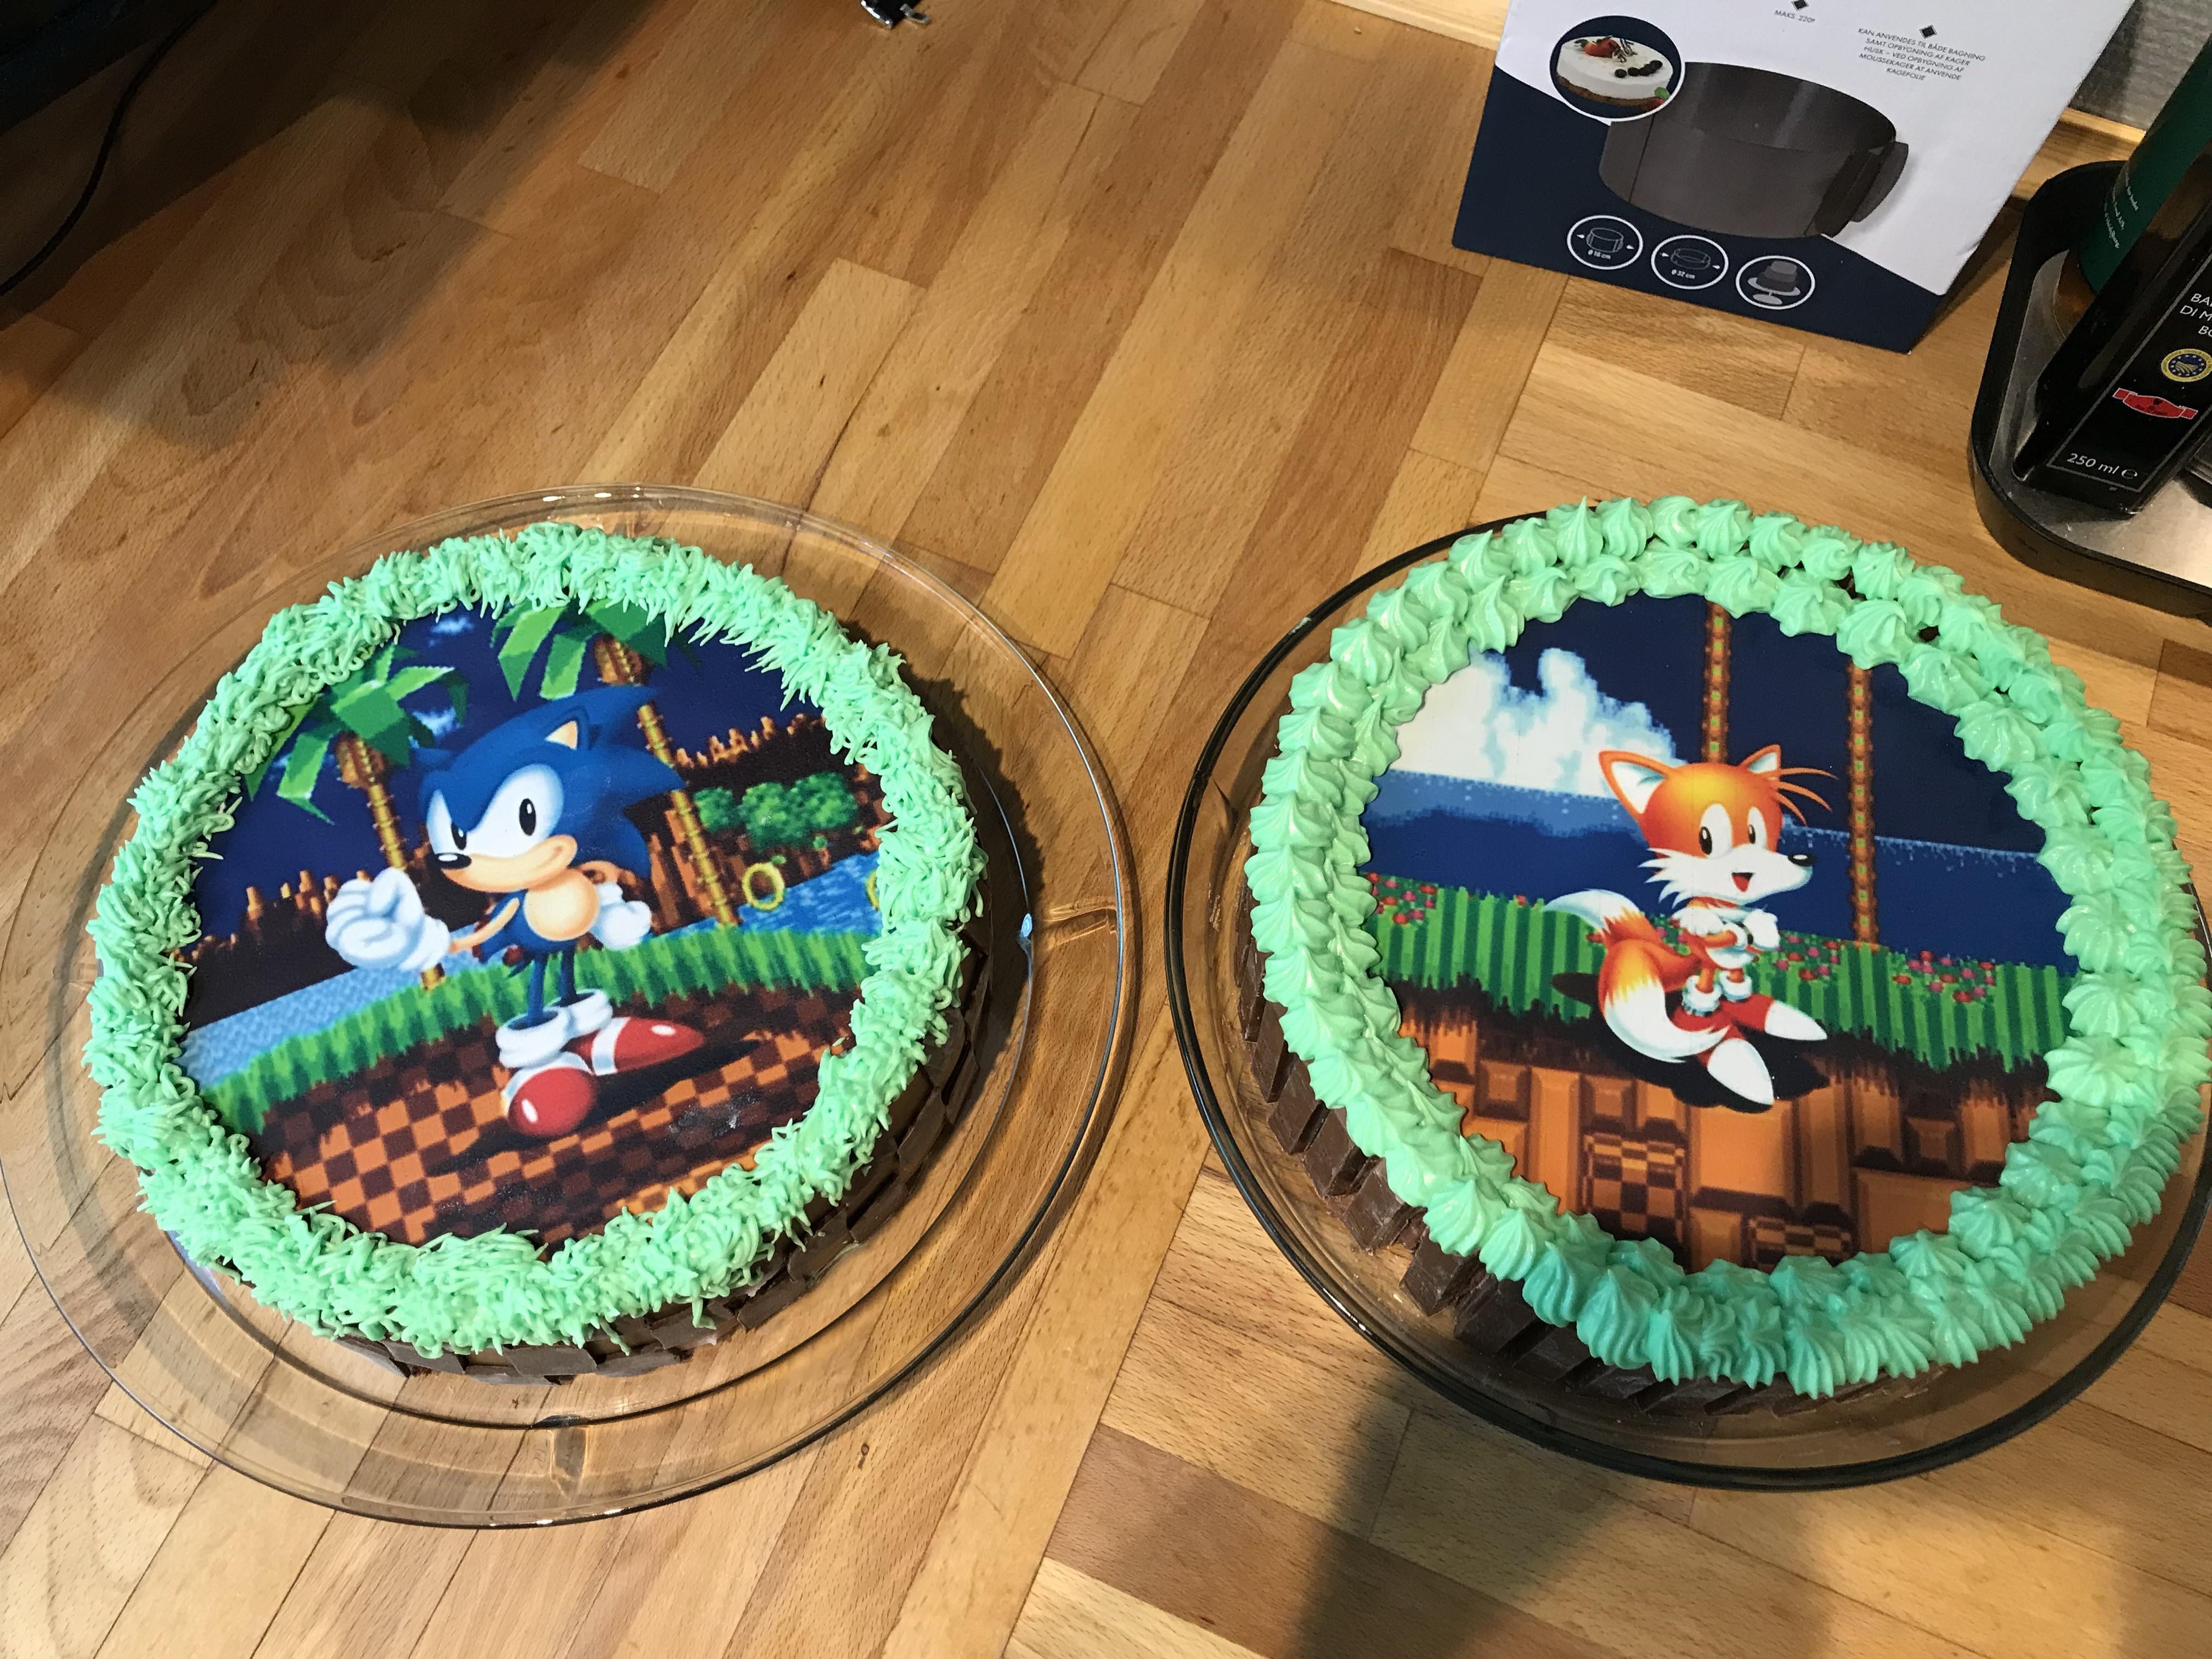 Sonic Cake Ideas: A Sweet Spin on Gaming 2